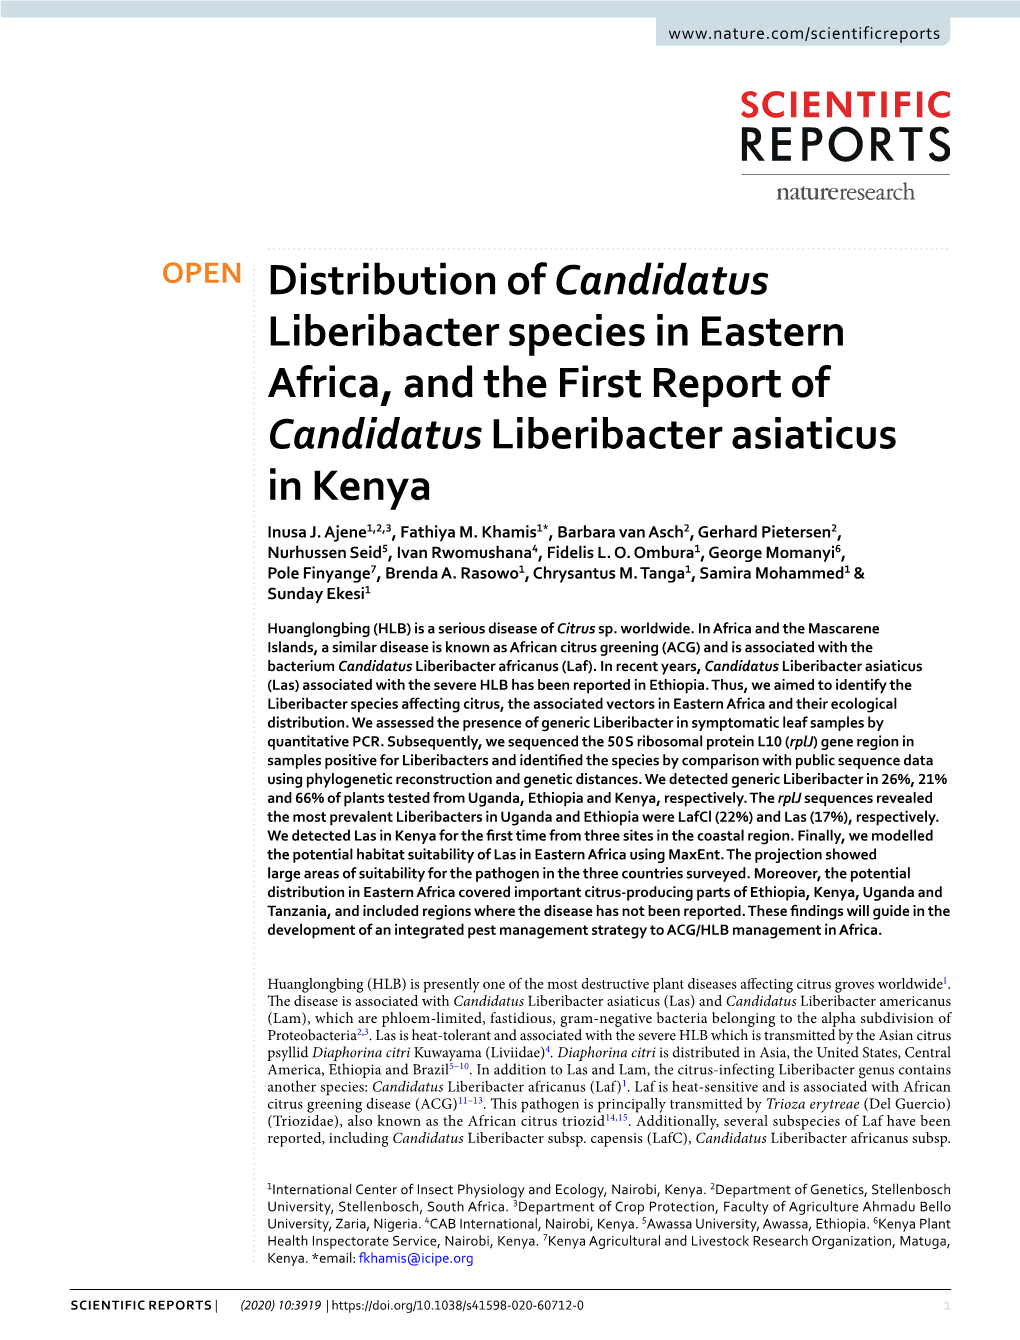 Distribution of Candidatus Liberibacter Species in Eastern Africa, and the First Report of Candidatus Liberibacter Asiaticus in Kenya Inusa J